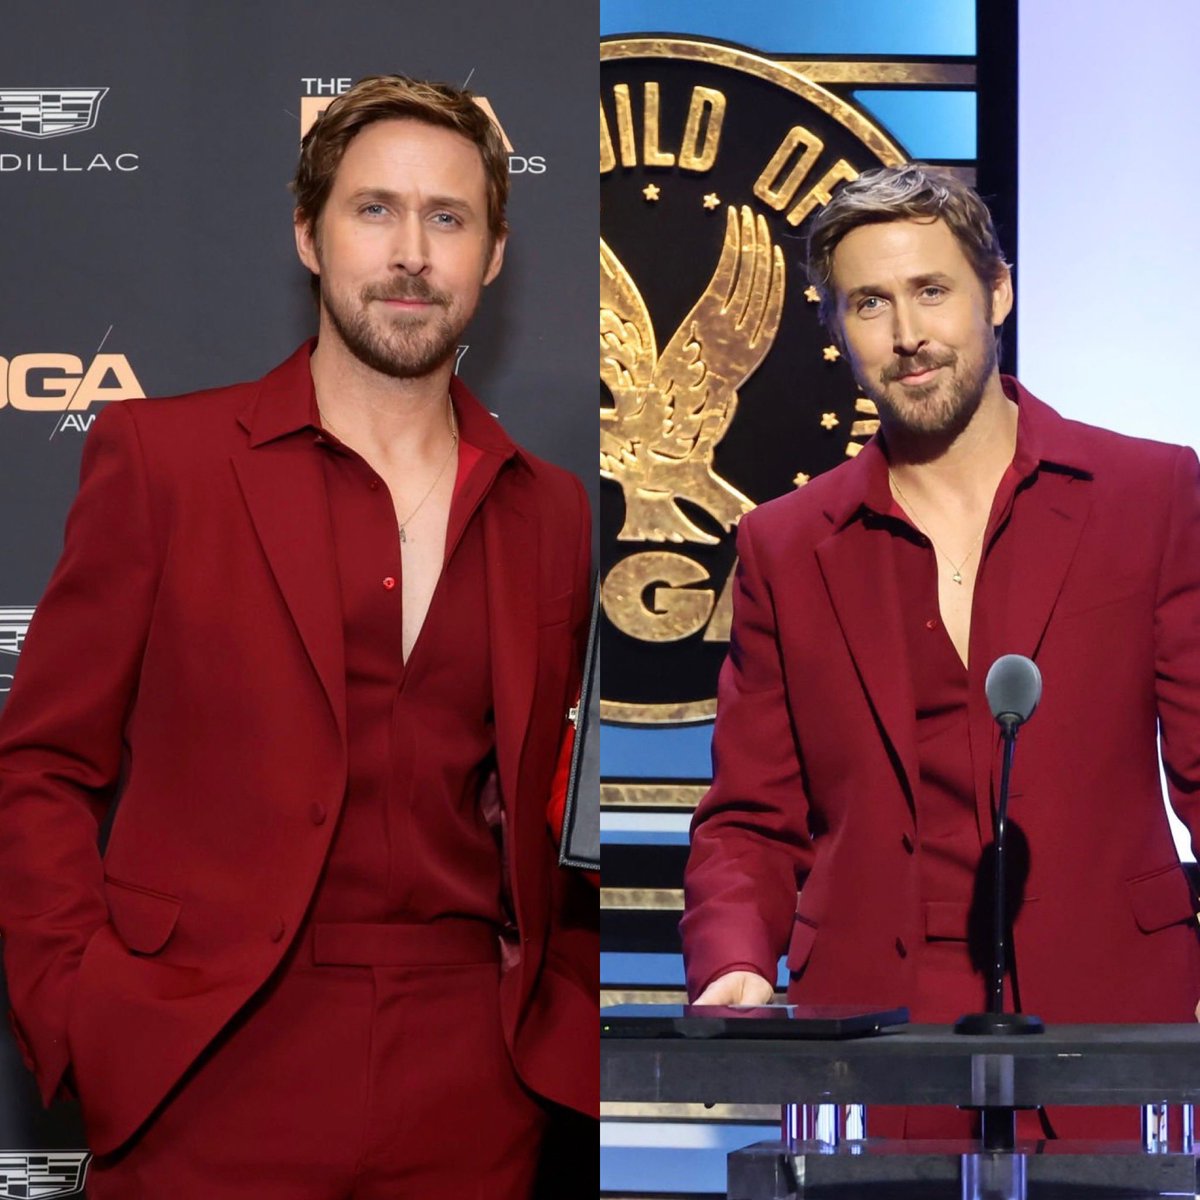 Ryan Gosling in red. That’s it. That’s the post. #DGAAwards